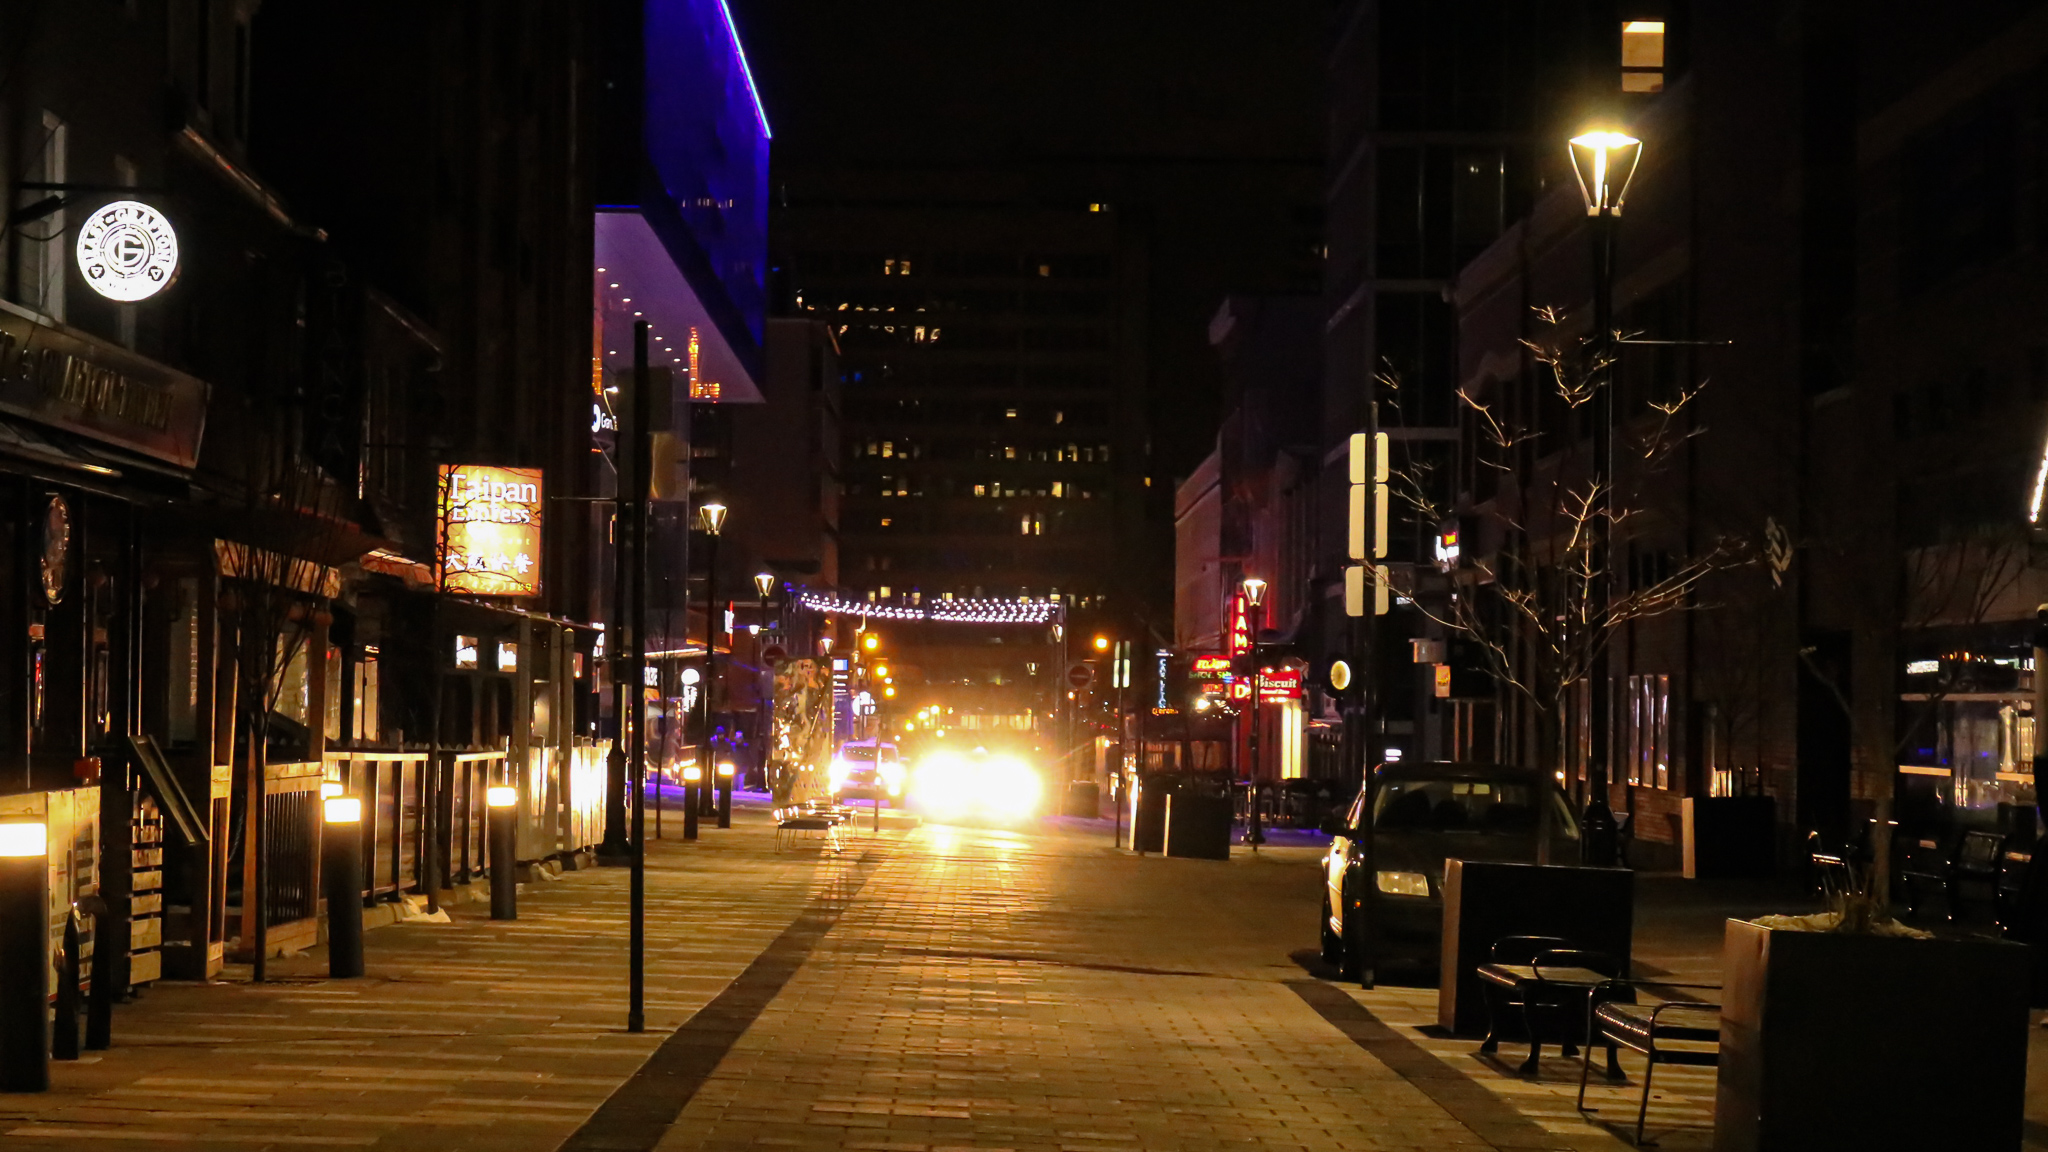 A quiet and empty Friday night on Argyle street. Every two to five minutes, a cab drives by.